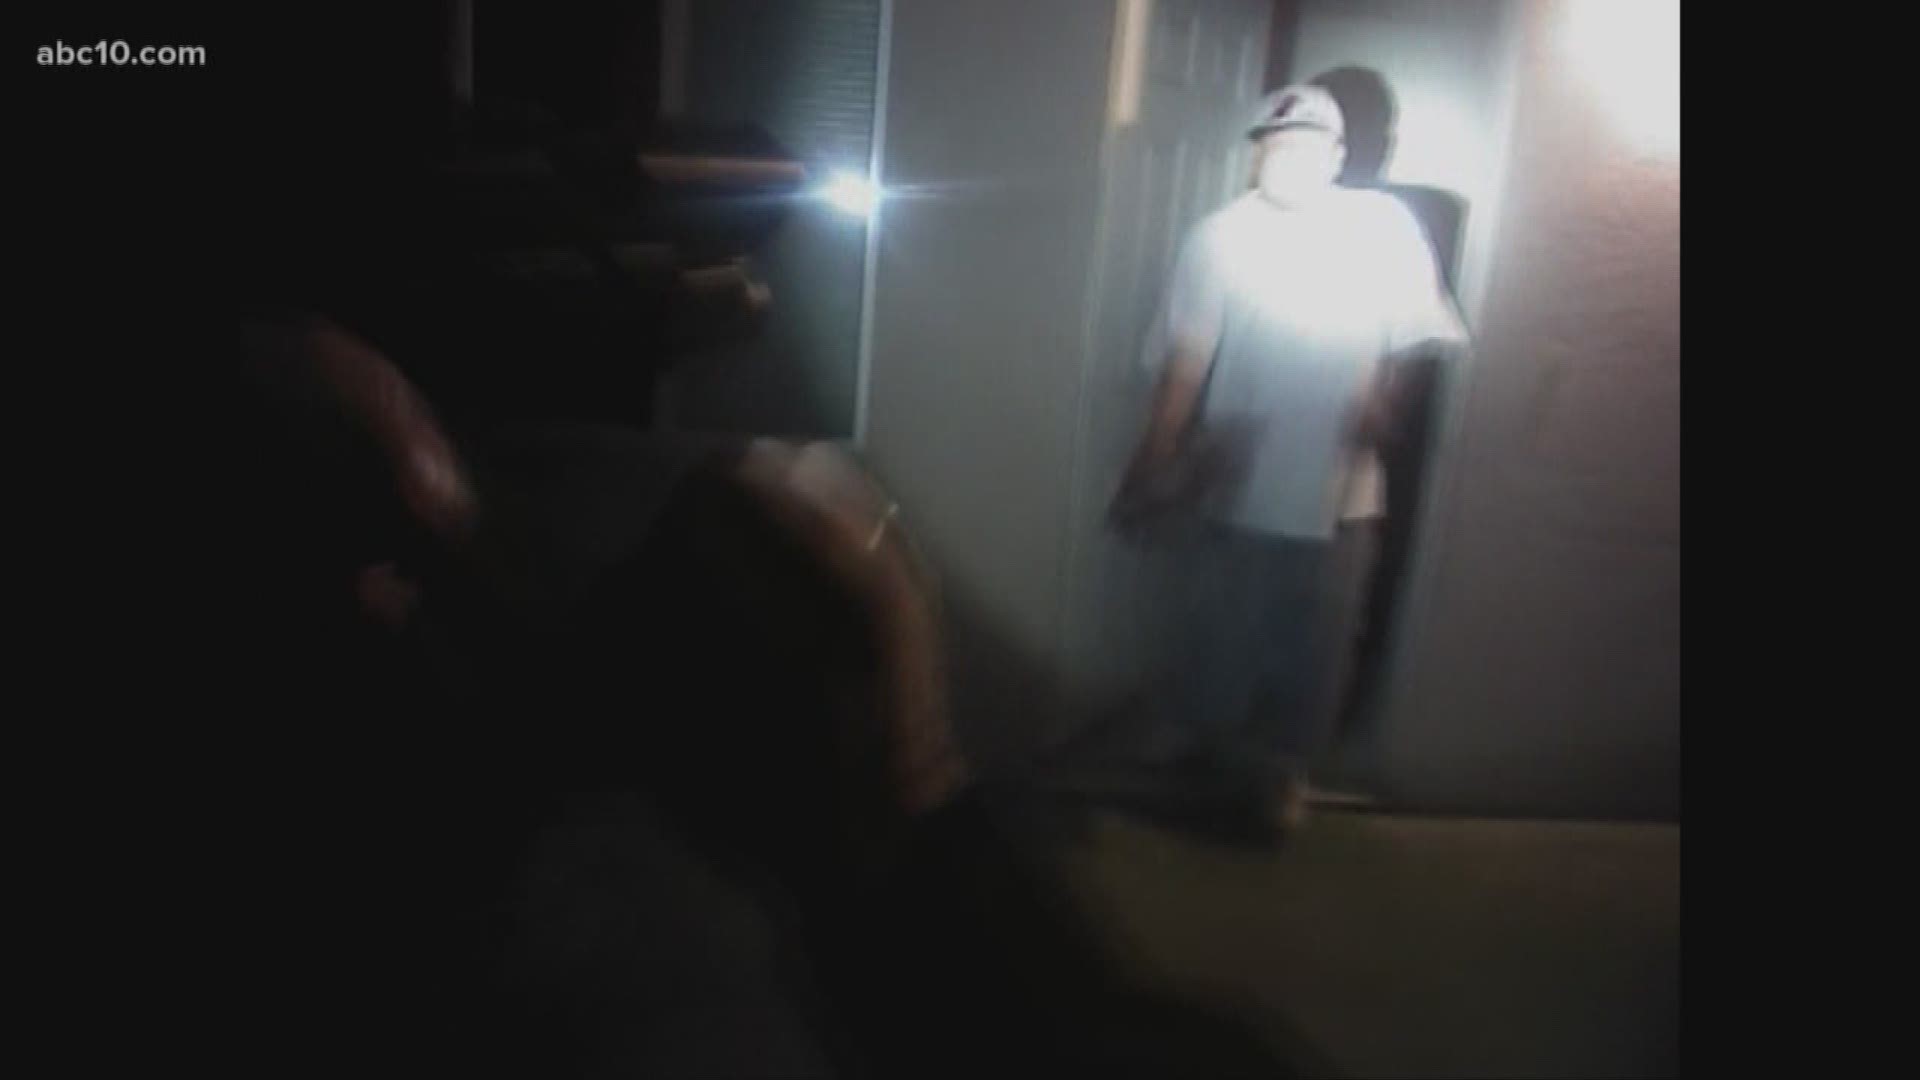 Modesto Police released body camera footage from a 2014 shooting that shows an officer responding to a domestic dispute fire one shot at an unarmed man.